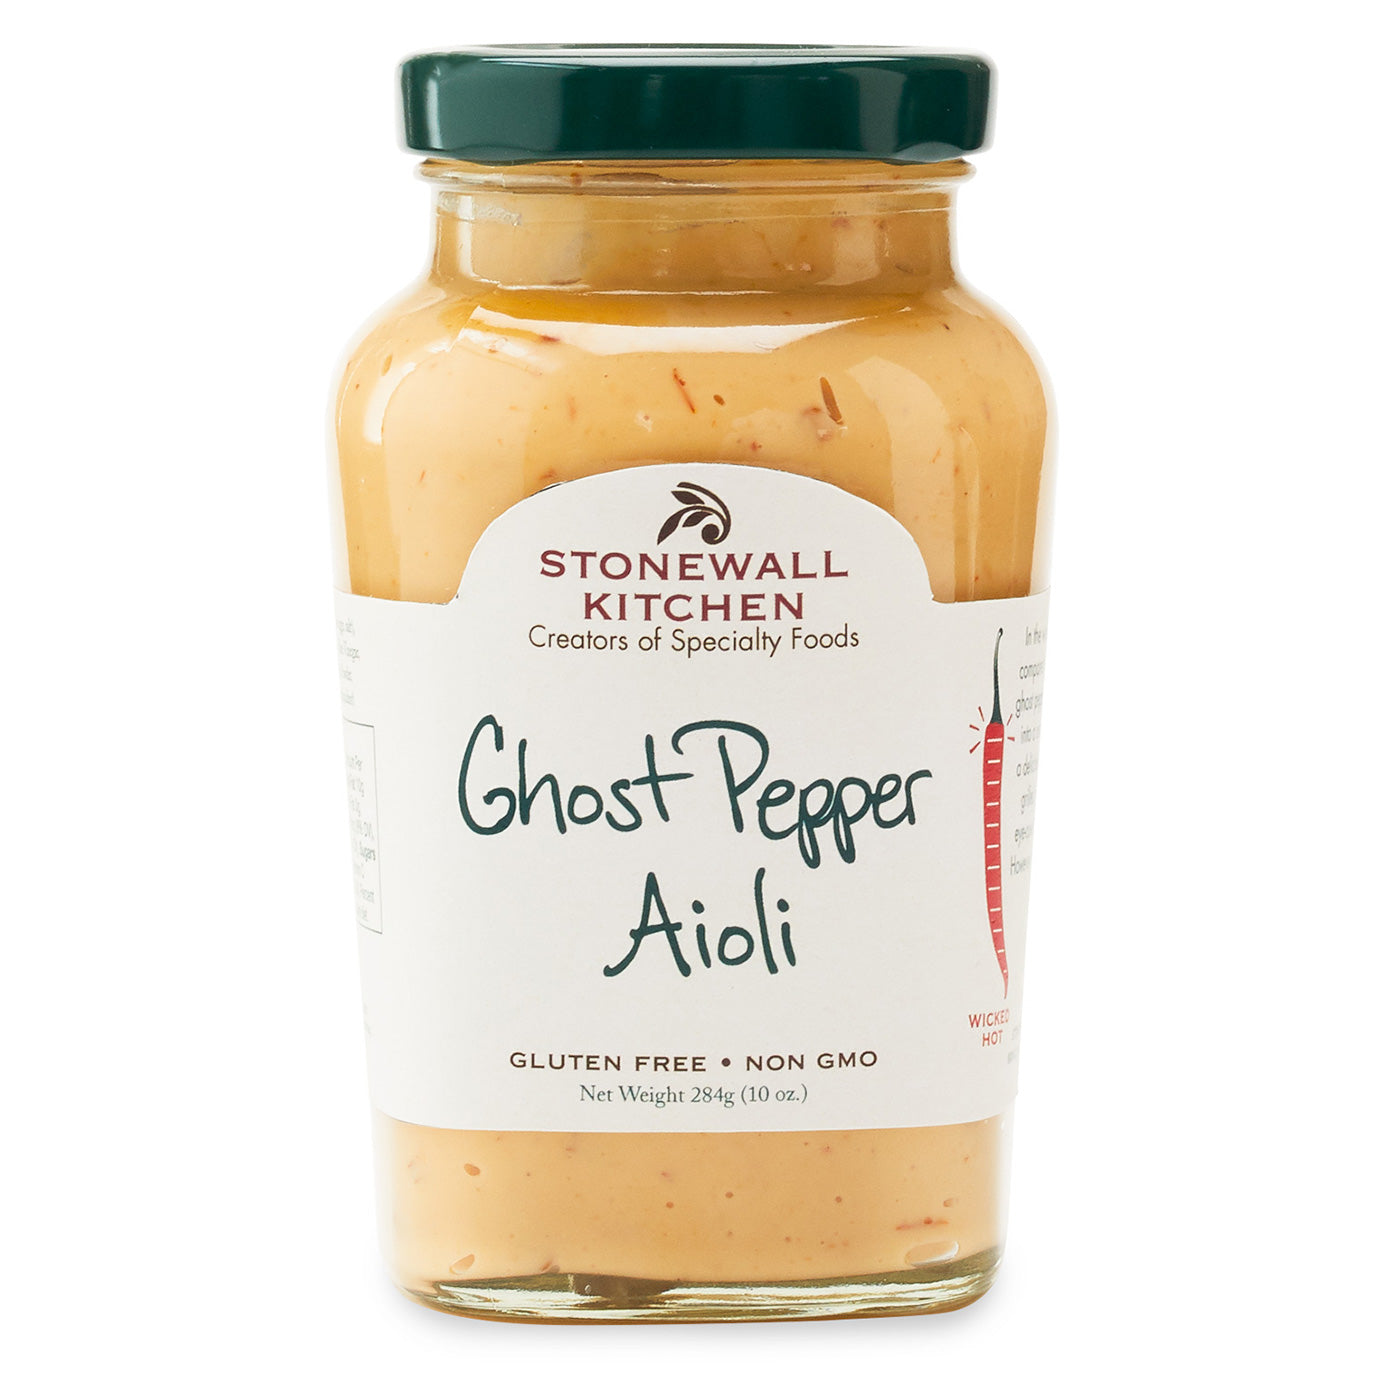 Stonewall Kitchen Ghost Pepper aioli - Olive Oil Etcetera 